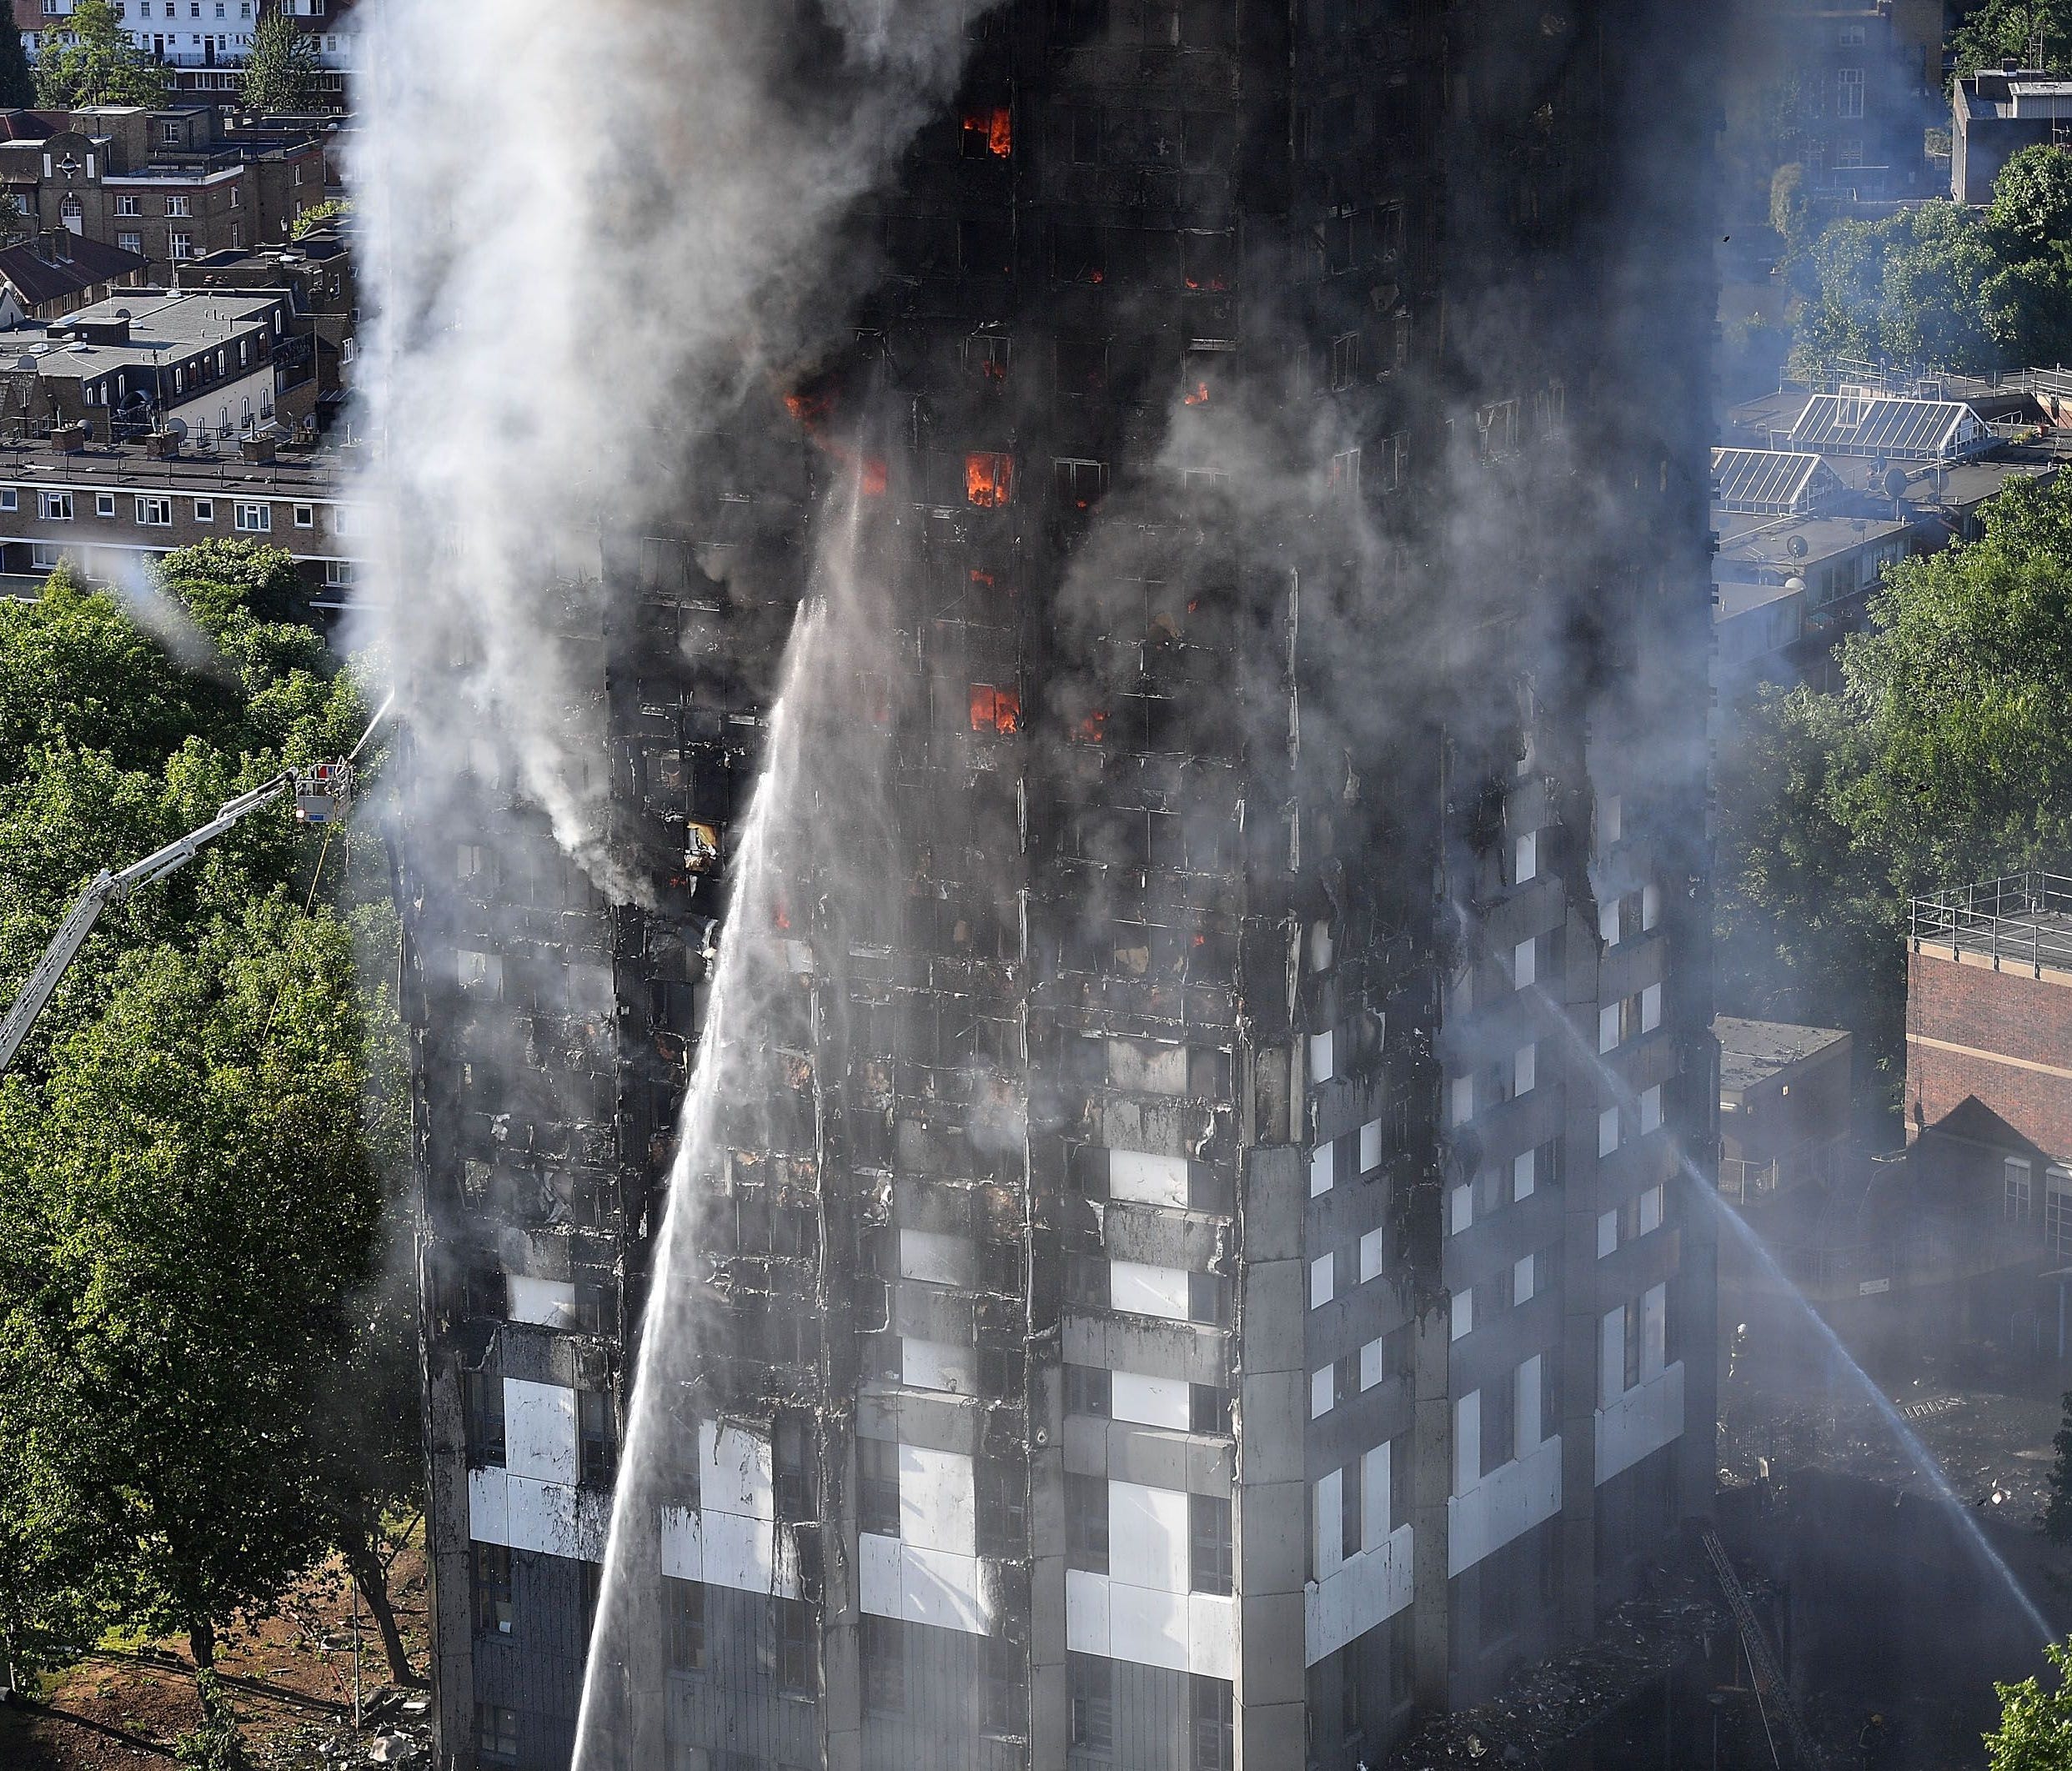 Fire fighters tackle a huge fire that engulfed the 24-story Grenfell Tower in Latimer Road, West London in the early hours of this morning on June 14, 2017 in London, England.